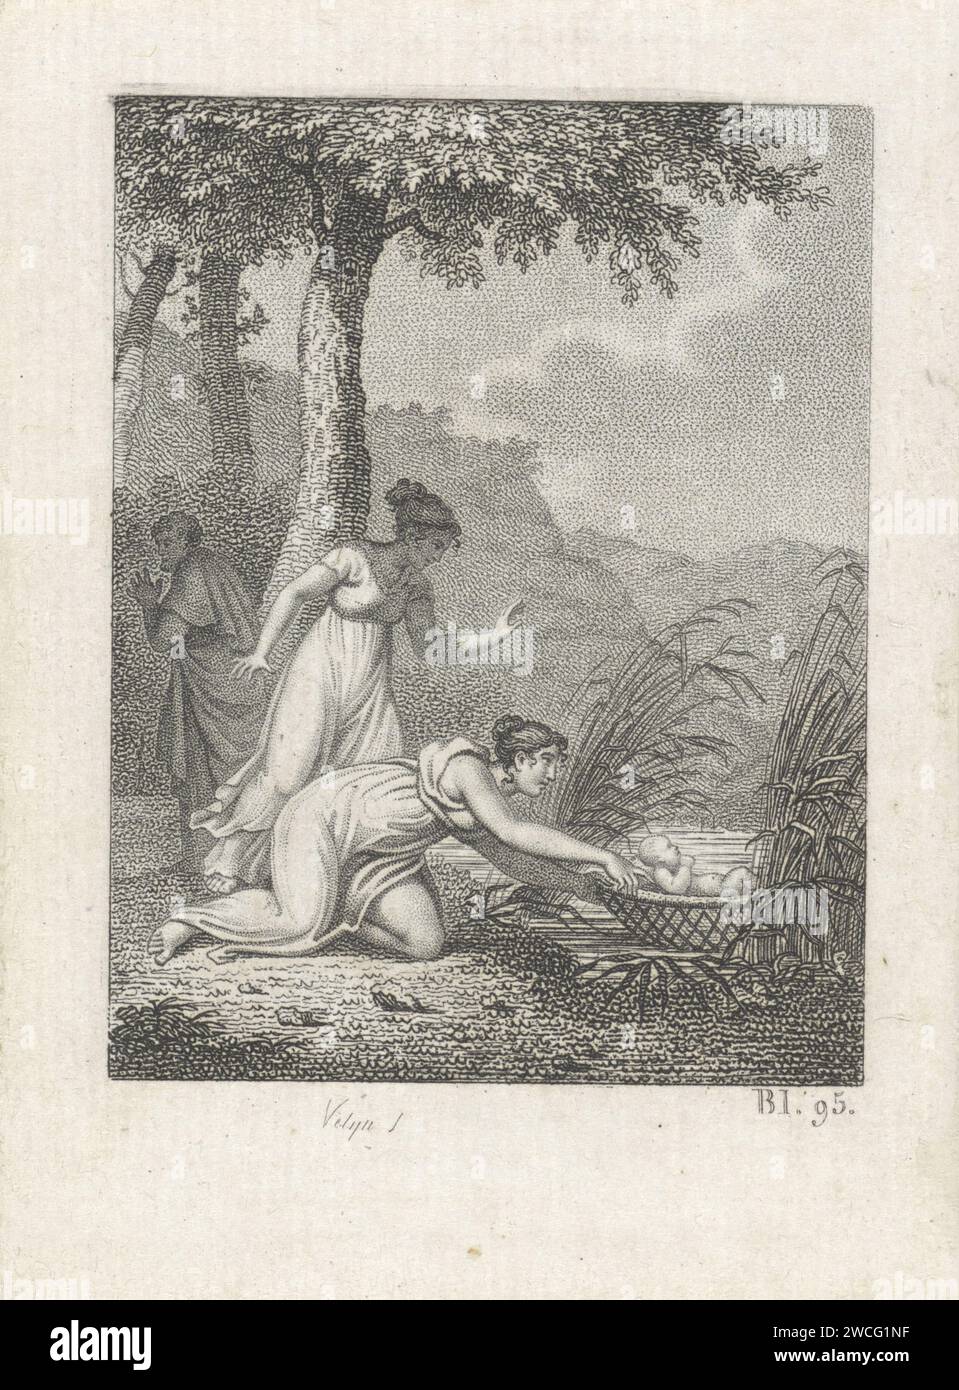 Pharaoh's daughter finds Moses in the Biezen Mandje, Philippus Velijn, 1820 print The daughter of the Pharaoh finds Moses in the Biezen basket between the reeds on the banks of the Nile river (ex. 2: 5). Behind her a second woman and a running man in the background. Bottom right: bl. 9. Netherlands paper etching / engraving the finding of Moses: Pharaoh's daughter comes to bathe with her maidens in the river and discovers the child floating on the water Stock Photo